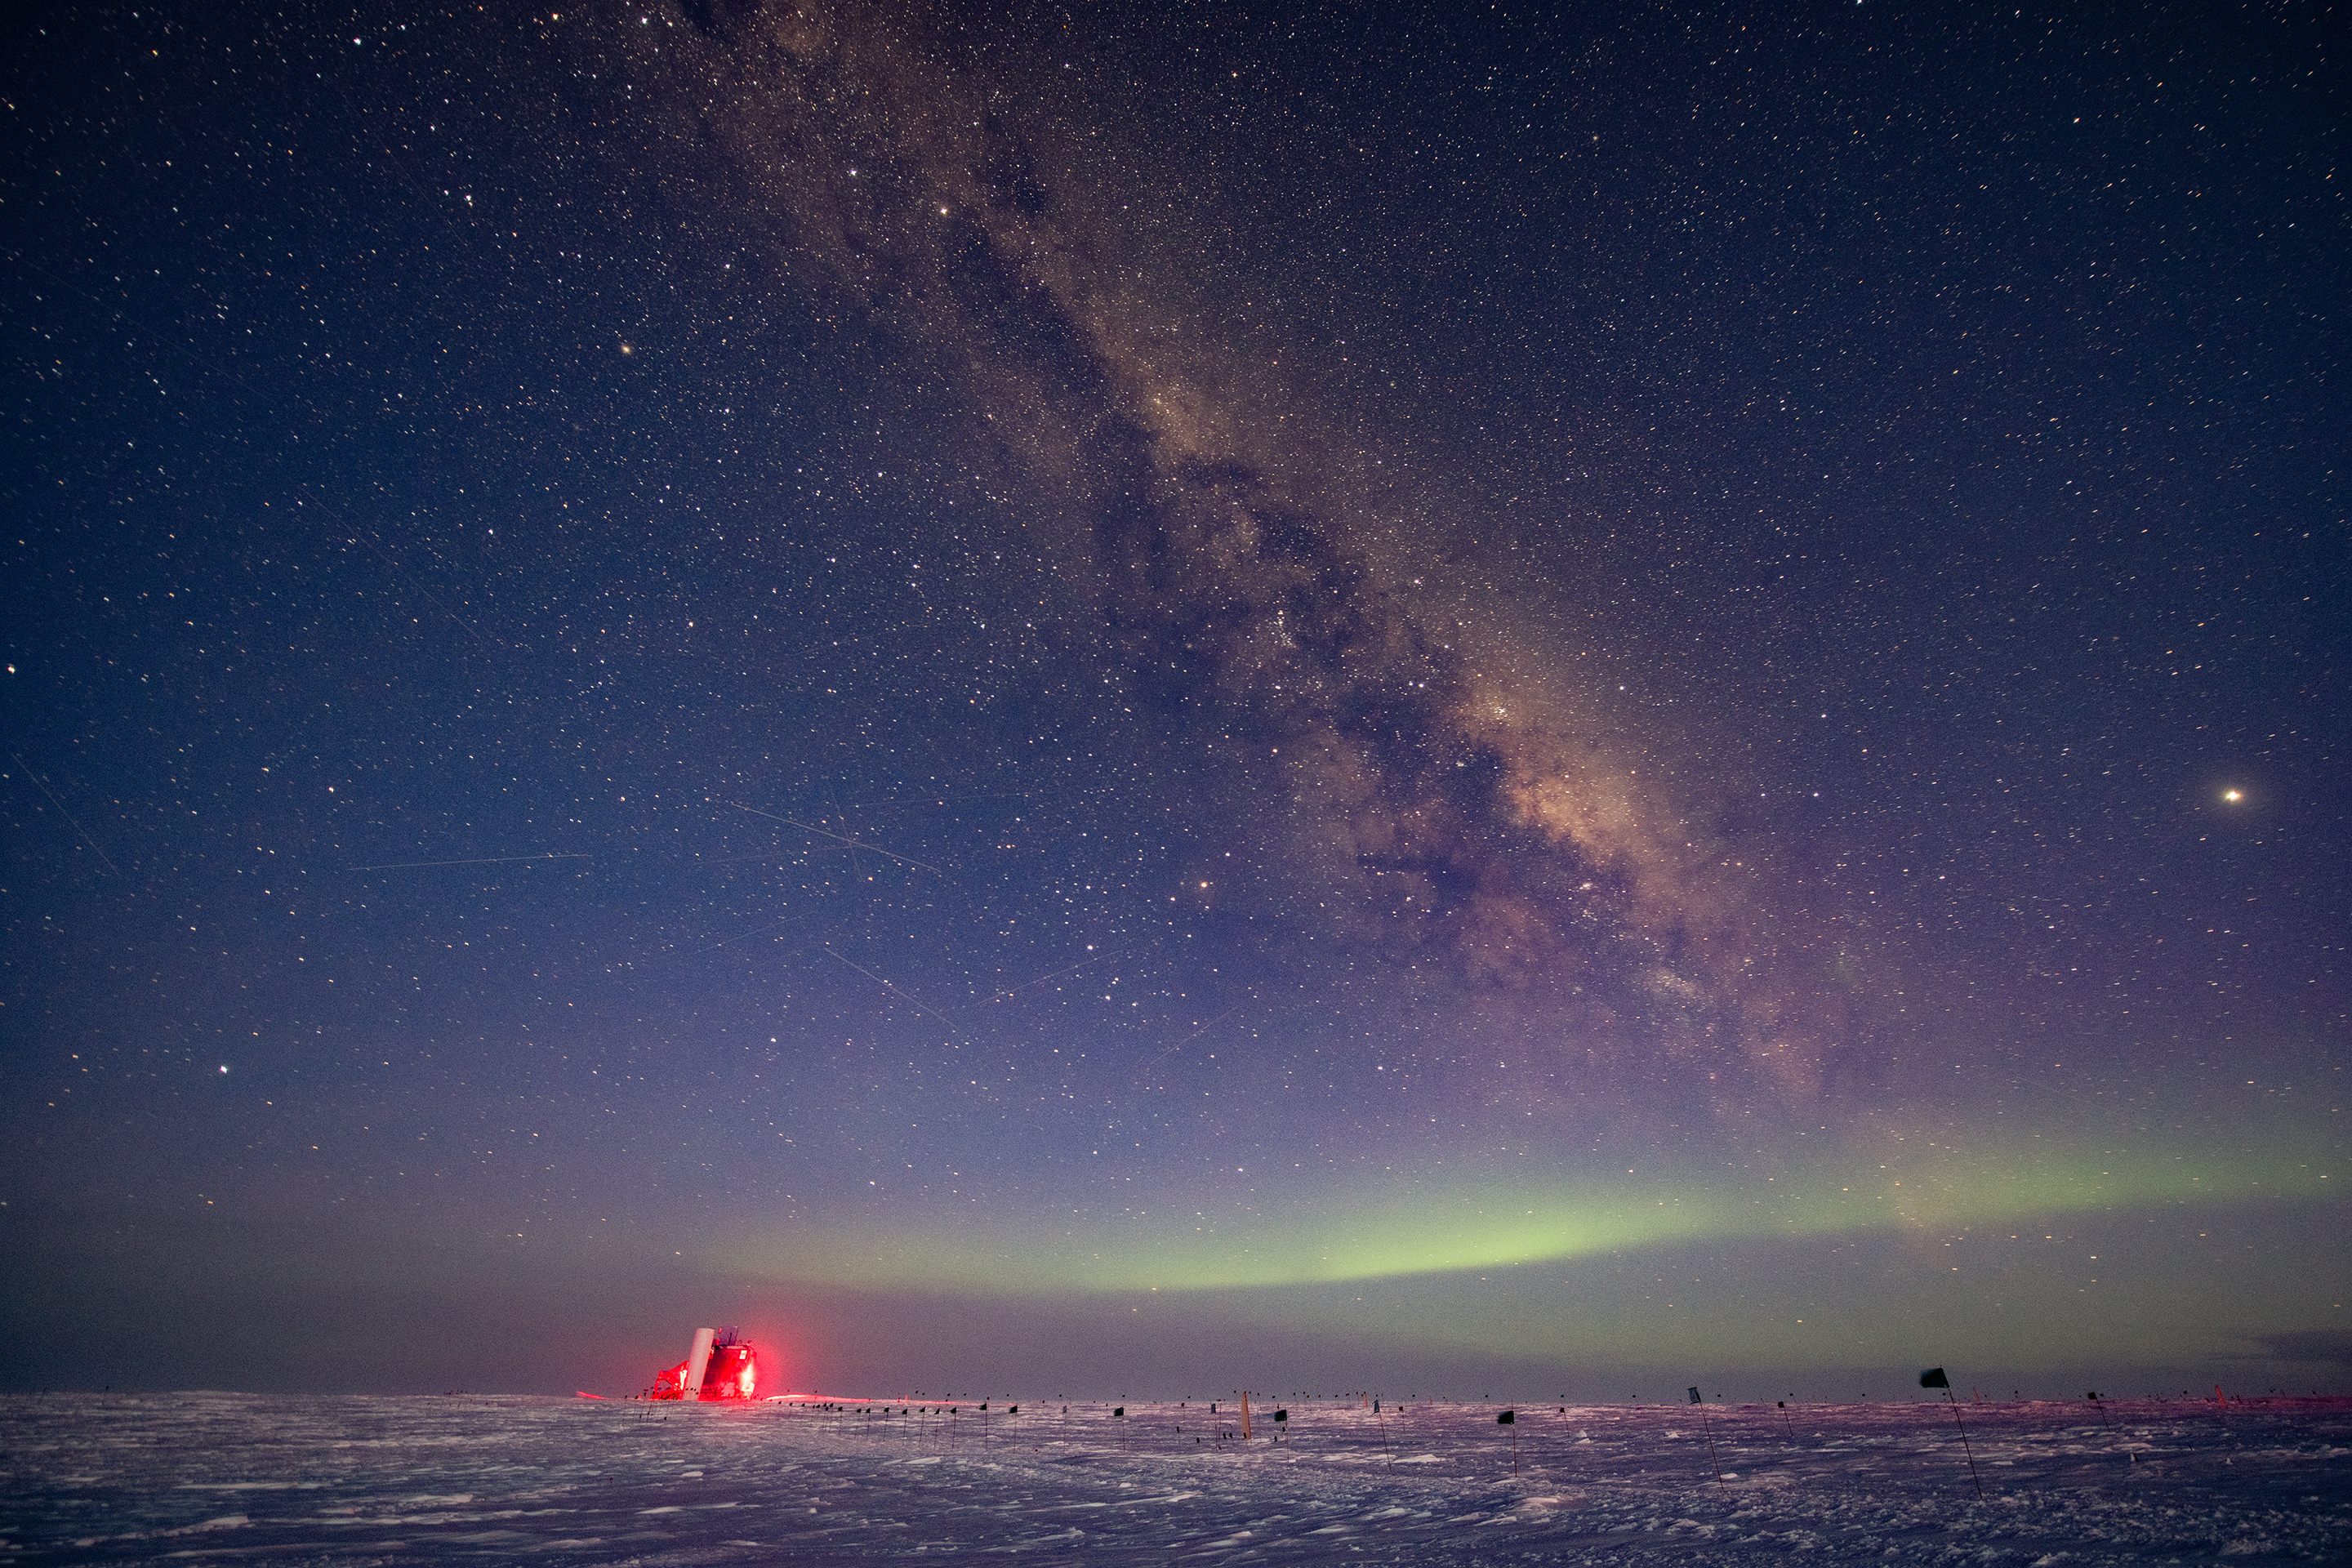 The IceCube Laboratory, lighted red against the night sky, is small in this landscape photograph of the South Pole white tundra, which also captures yellow stars and light green auroras.